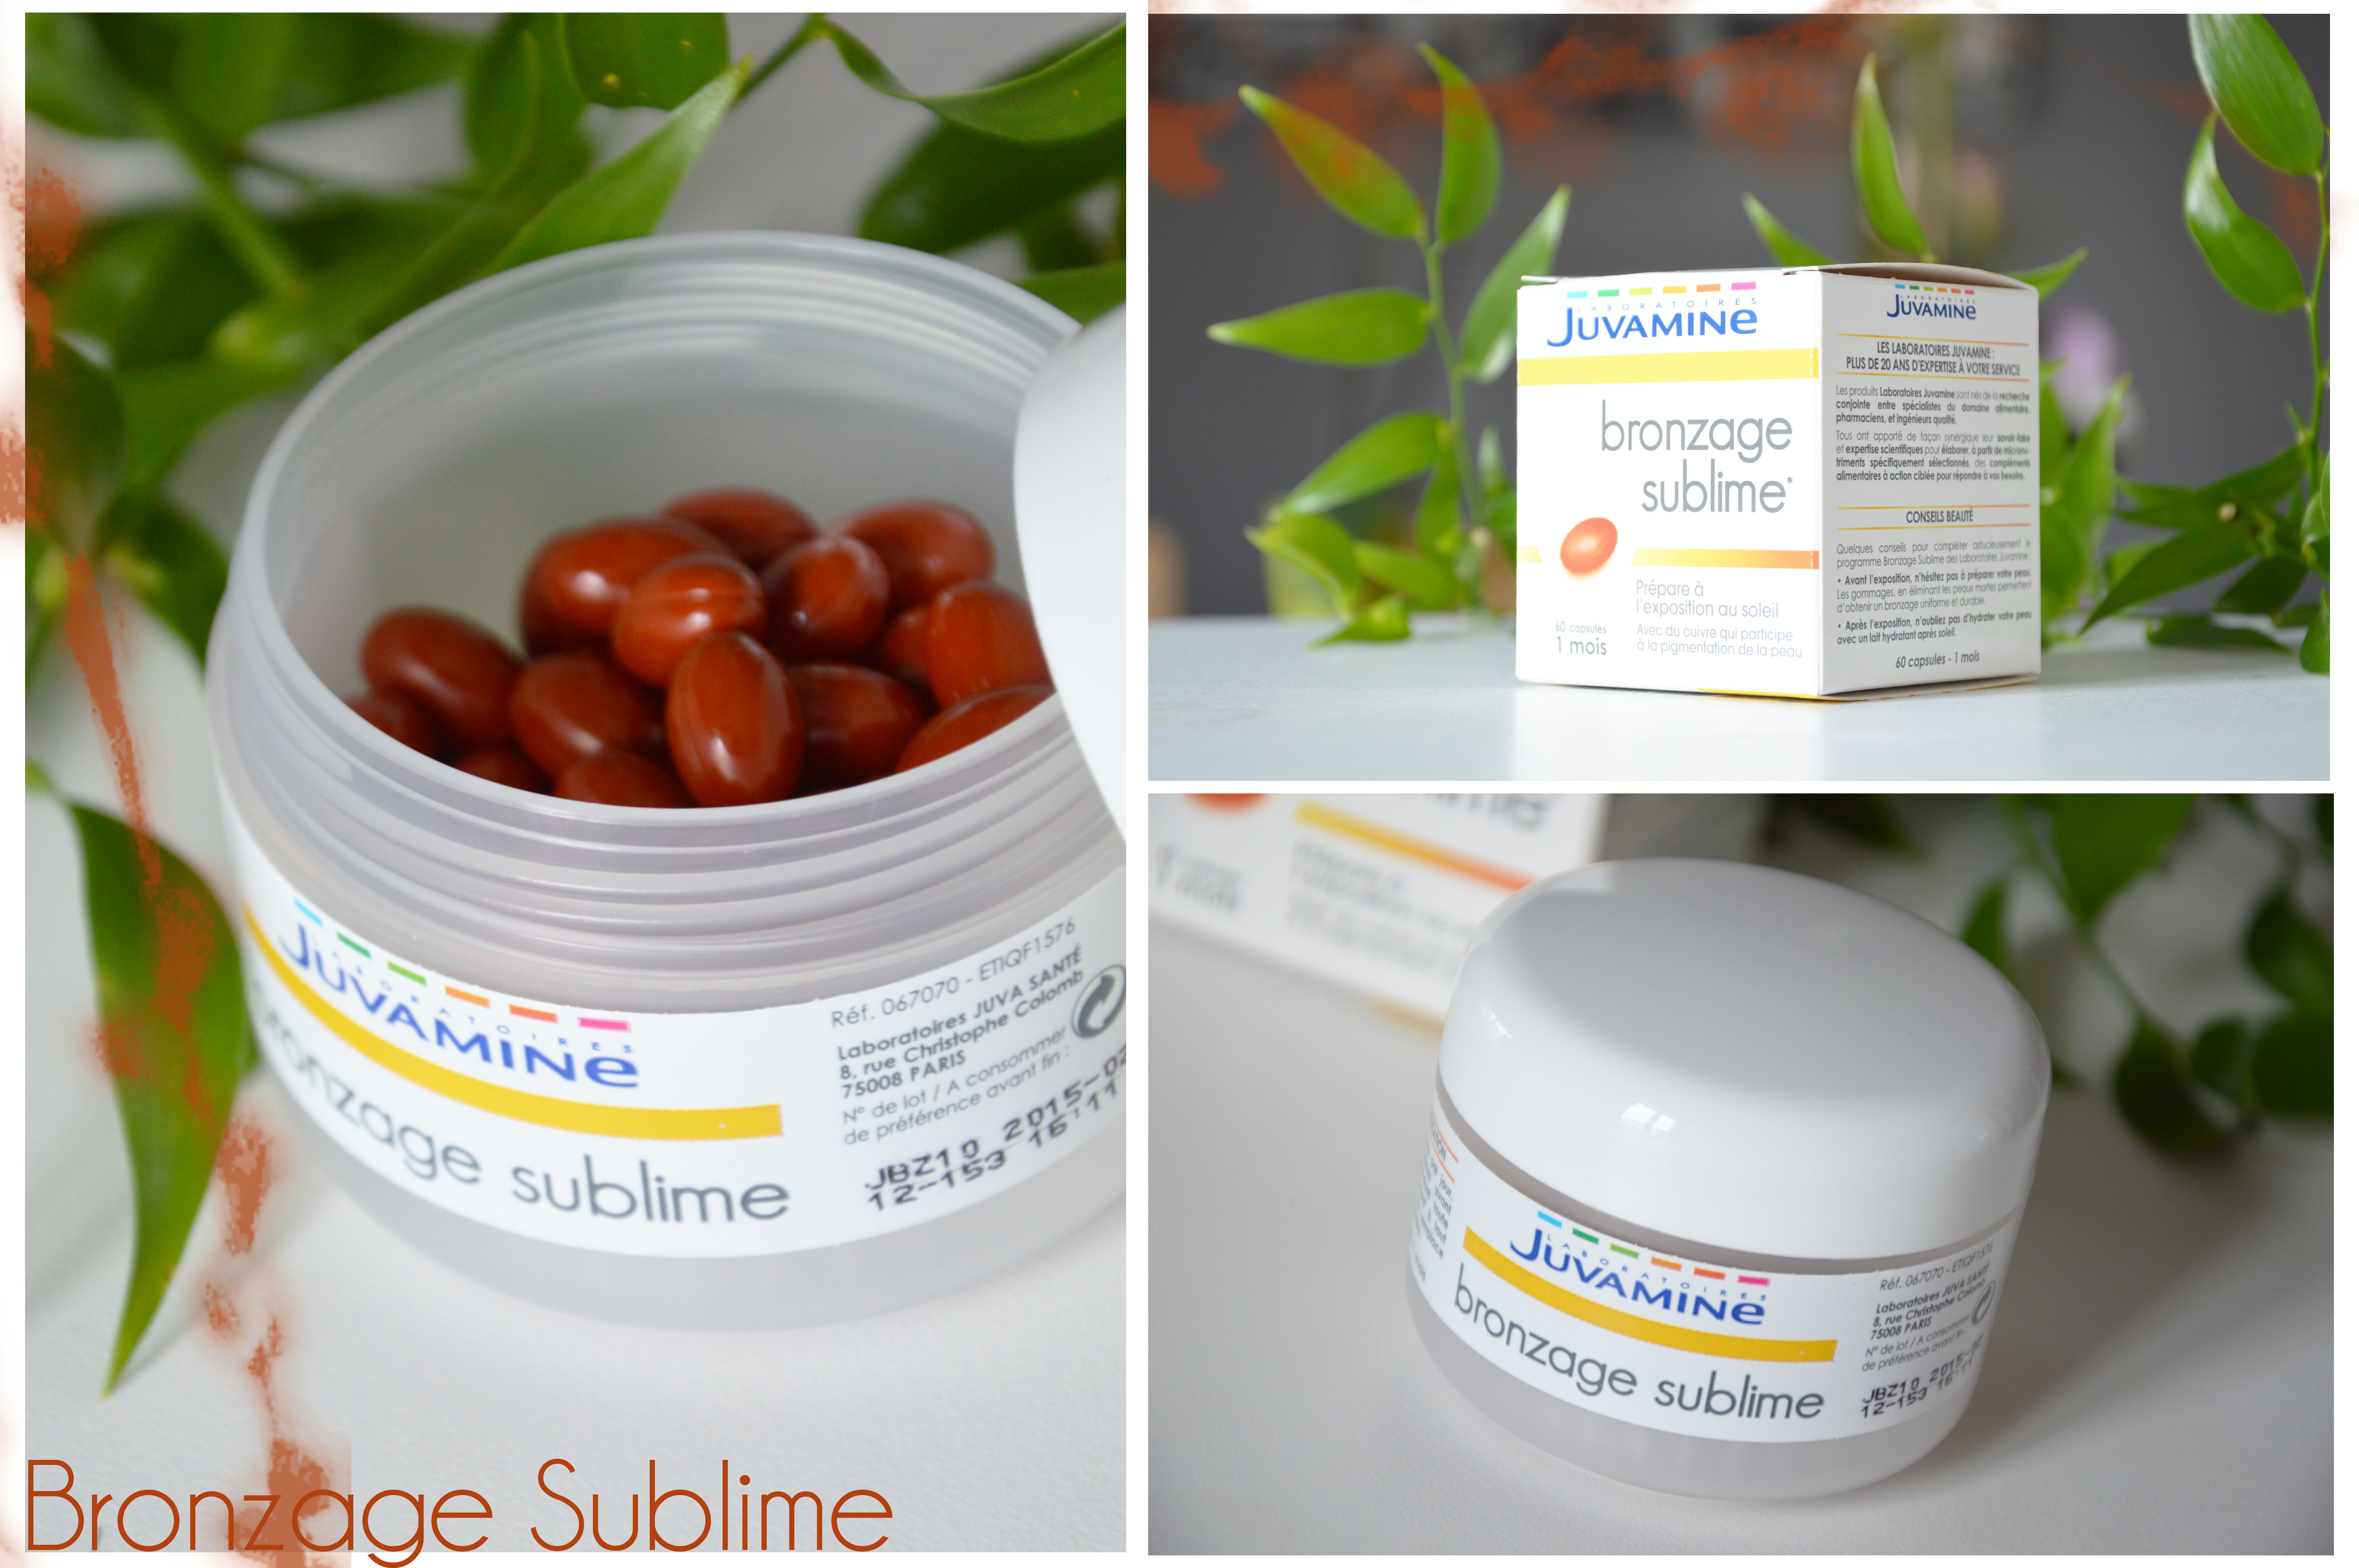 ALITTLEB_BLOG_BEAUTE_JUVAMINE_COMPLEMENTS_ALIMENTAIRES_REVUE_ZOOM_BRONZAGE_SUBLIME_DETAILS_PACKAGING